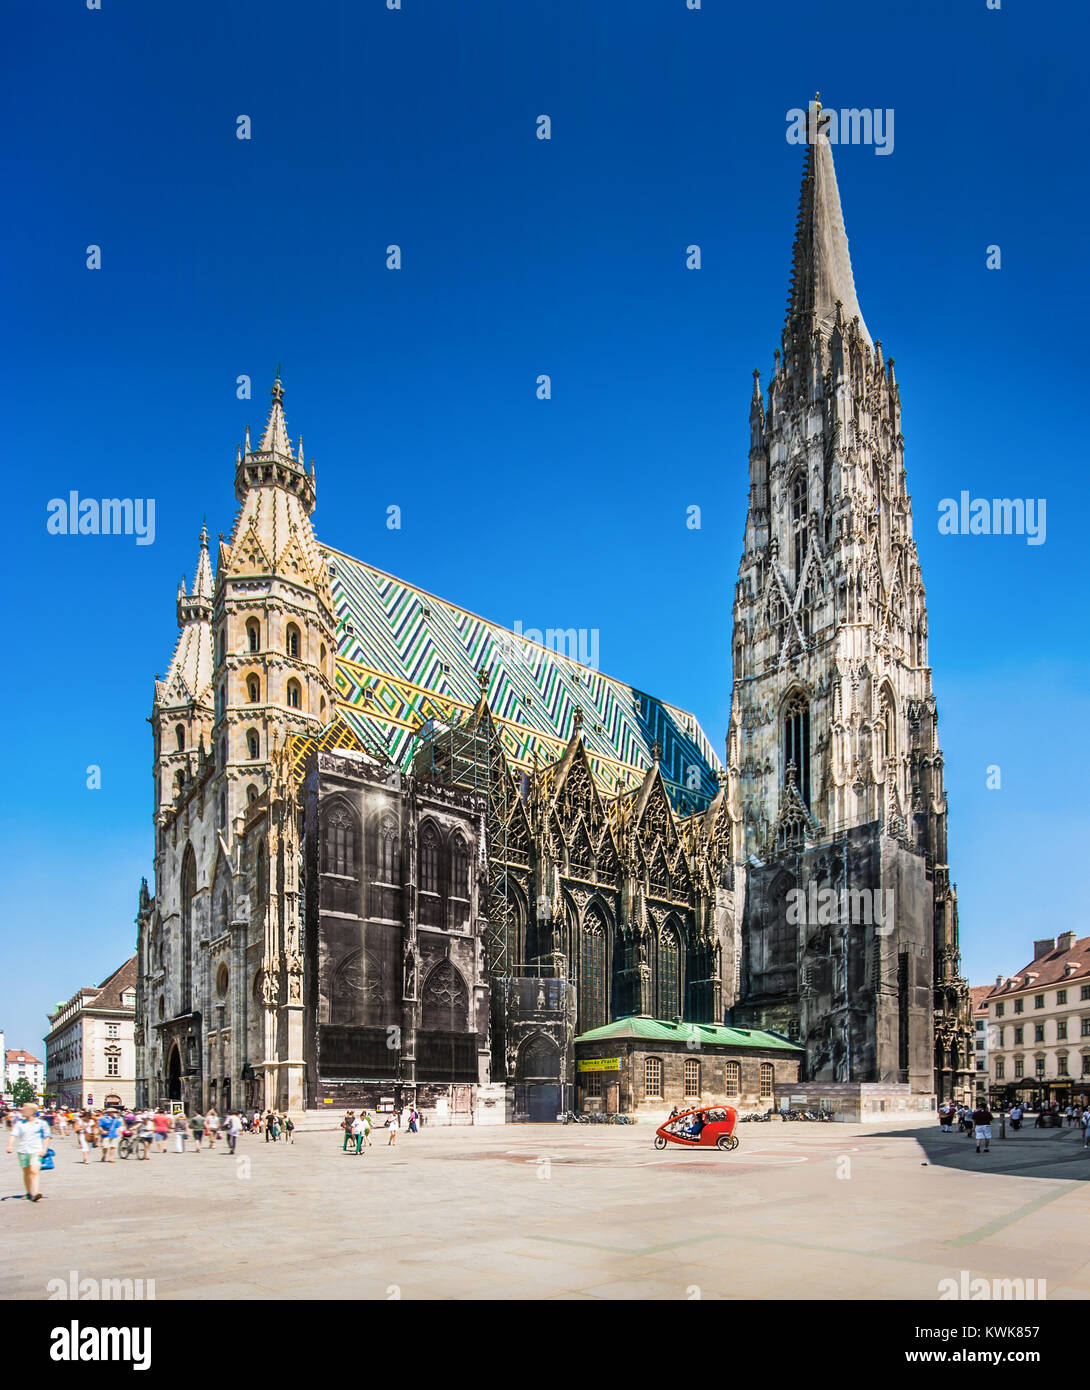 Beautiful view of famous St. Stephen's Cathedral (Wiener Stephansdom) at Stephansplatz in Vienna, Austria Stock Photo